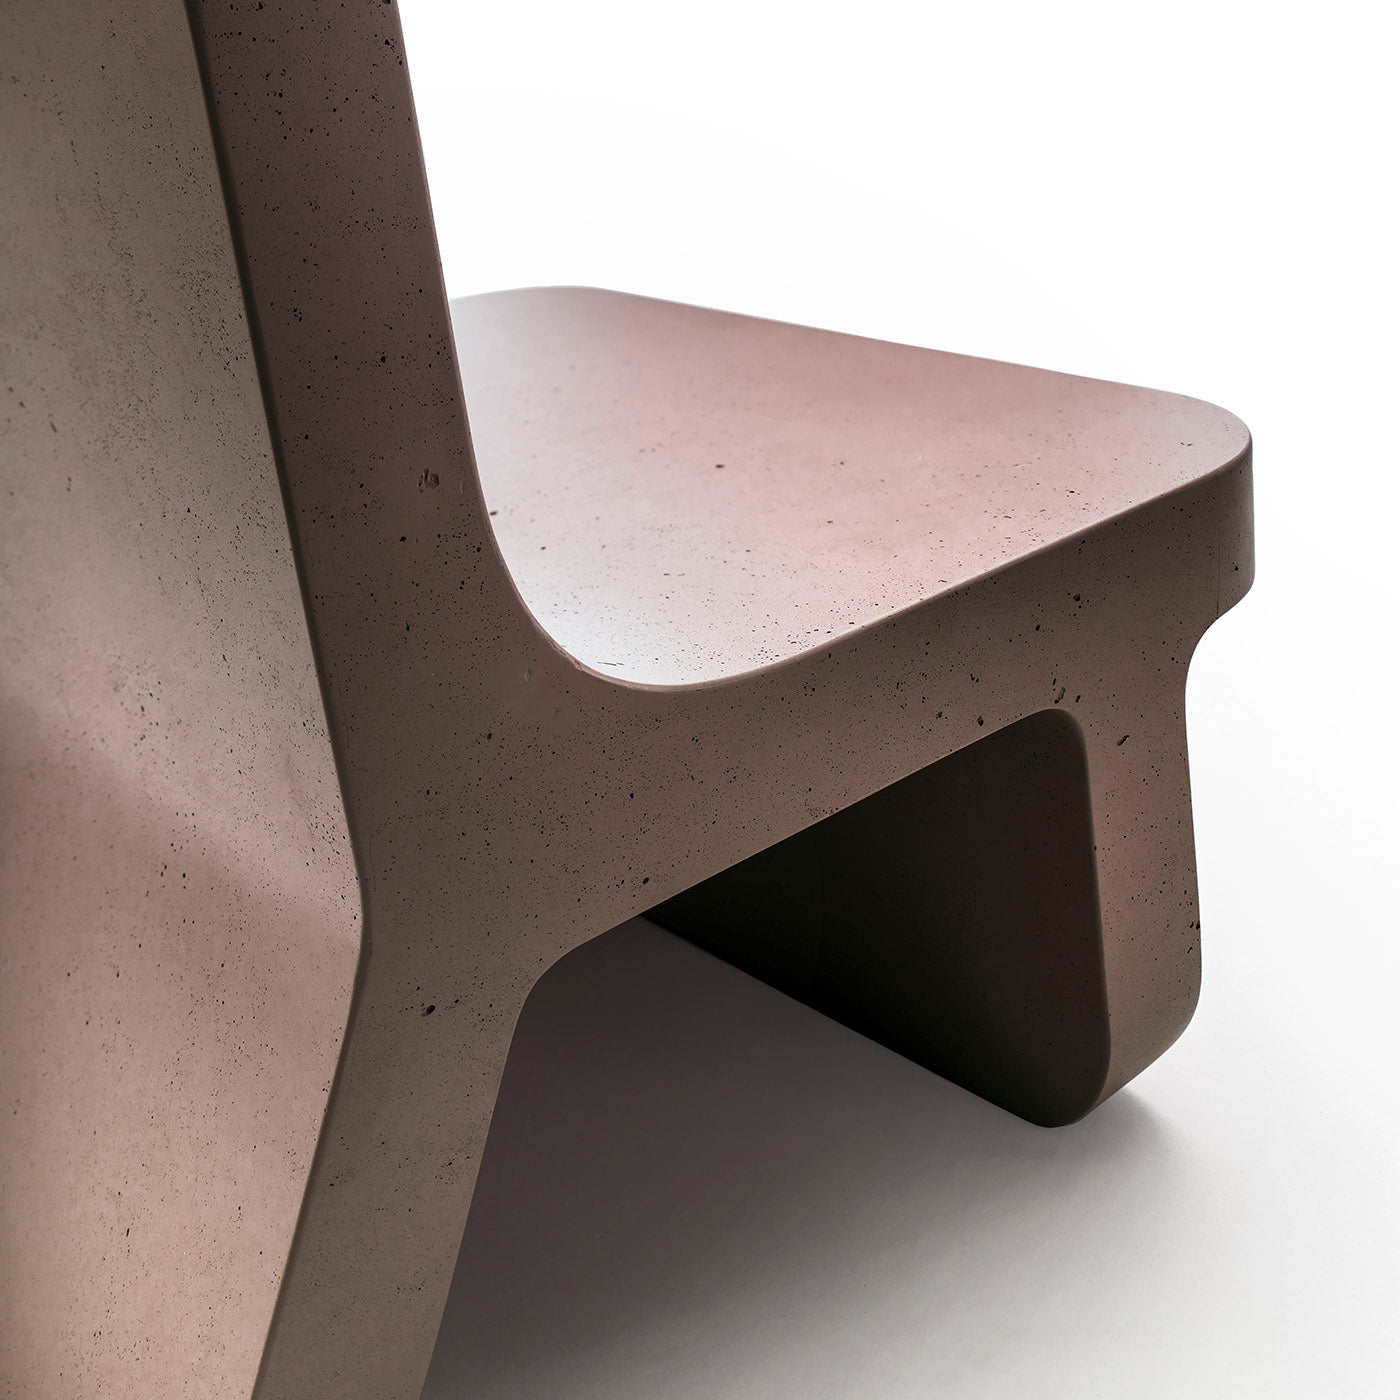 Torcello Lounge Chair by Defne Koz and Marco Susani - Alternative view 1